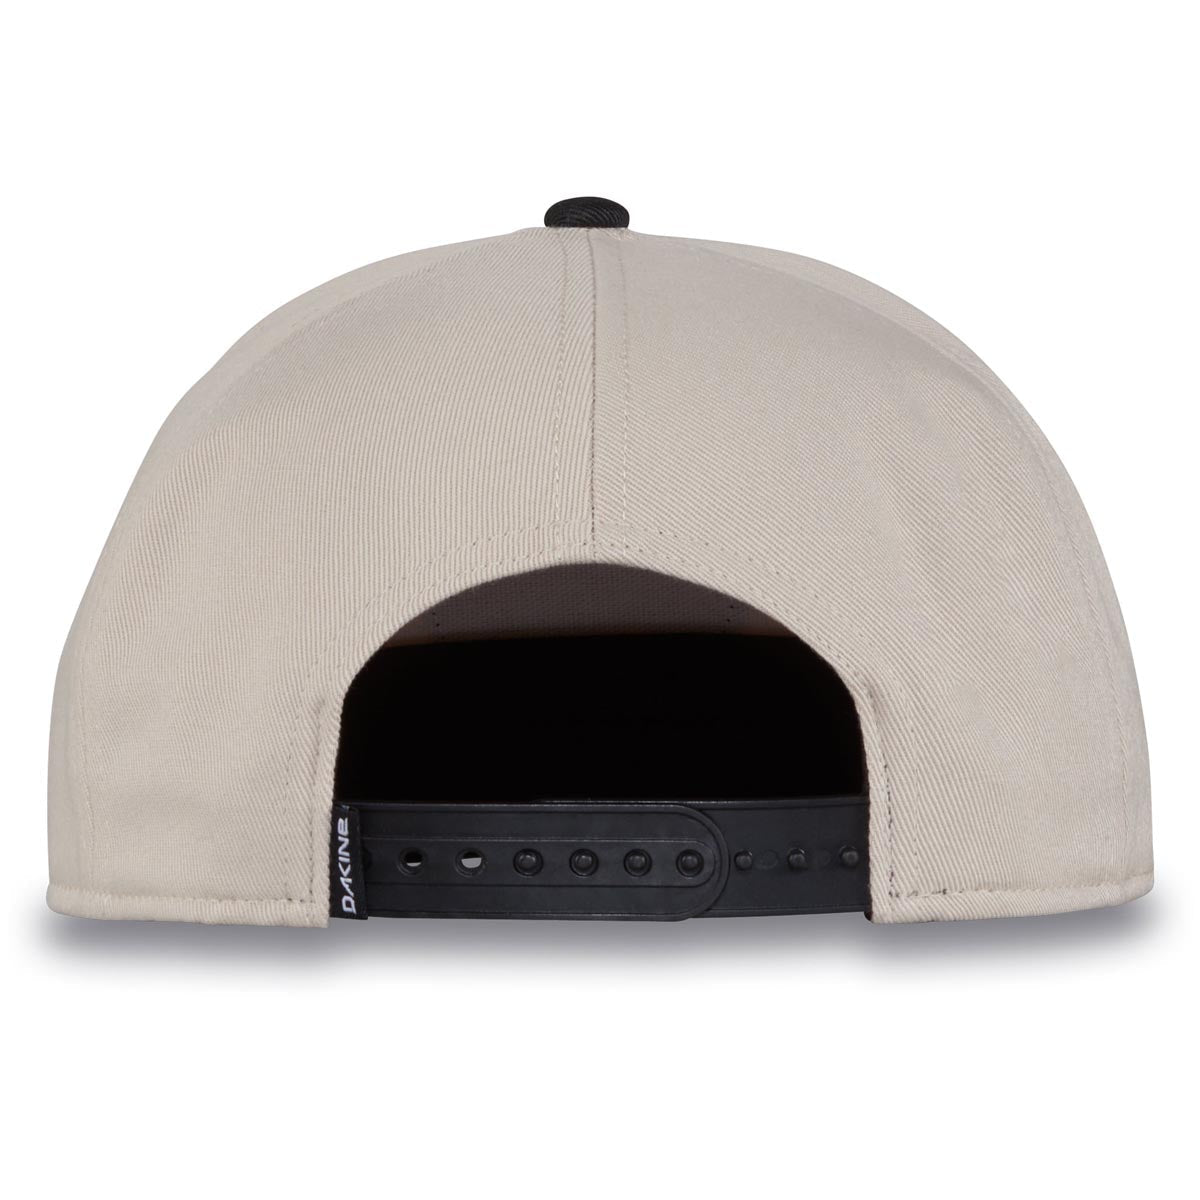 Dakine All Sports Patch Ball Hat - Silver Lining image 2